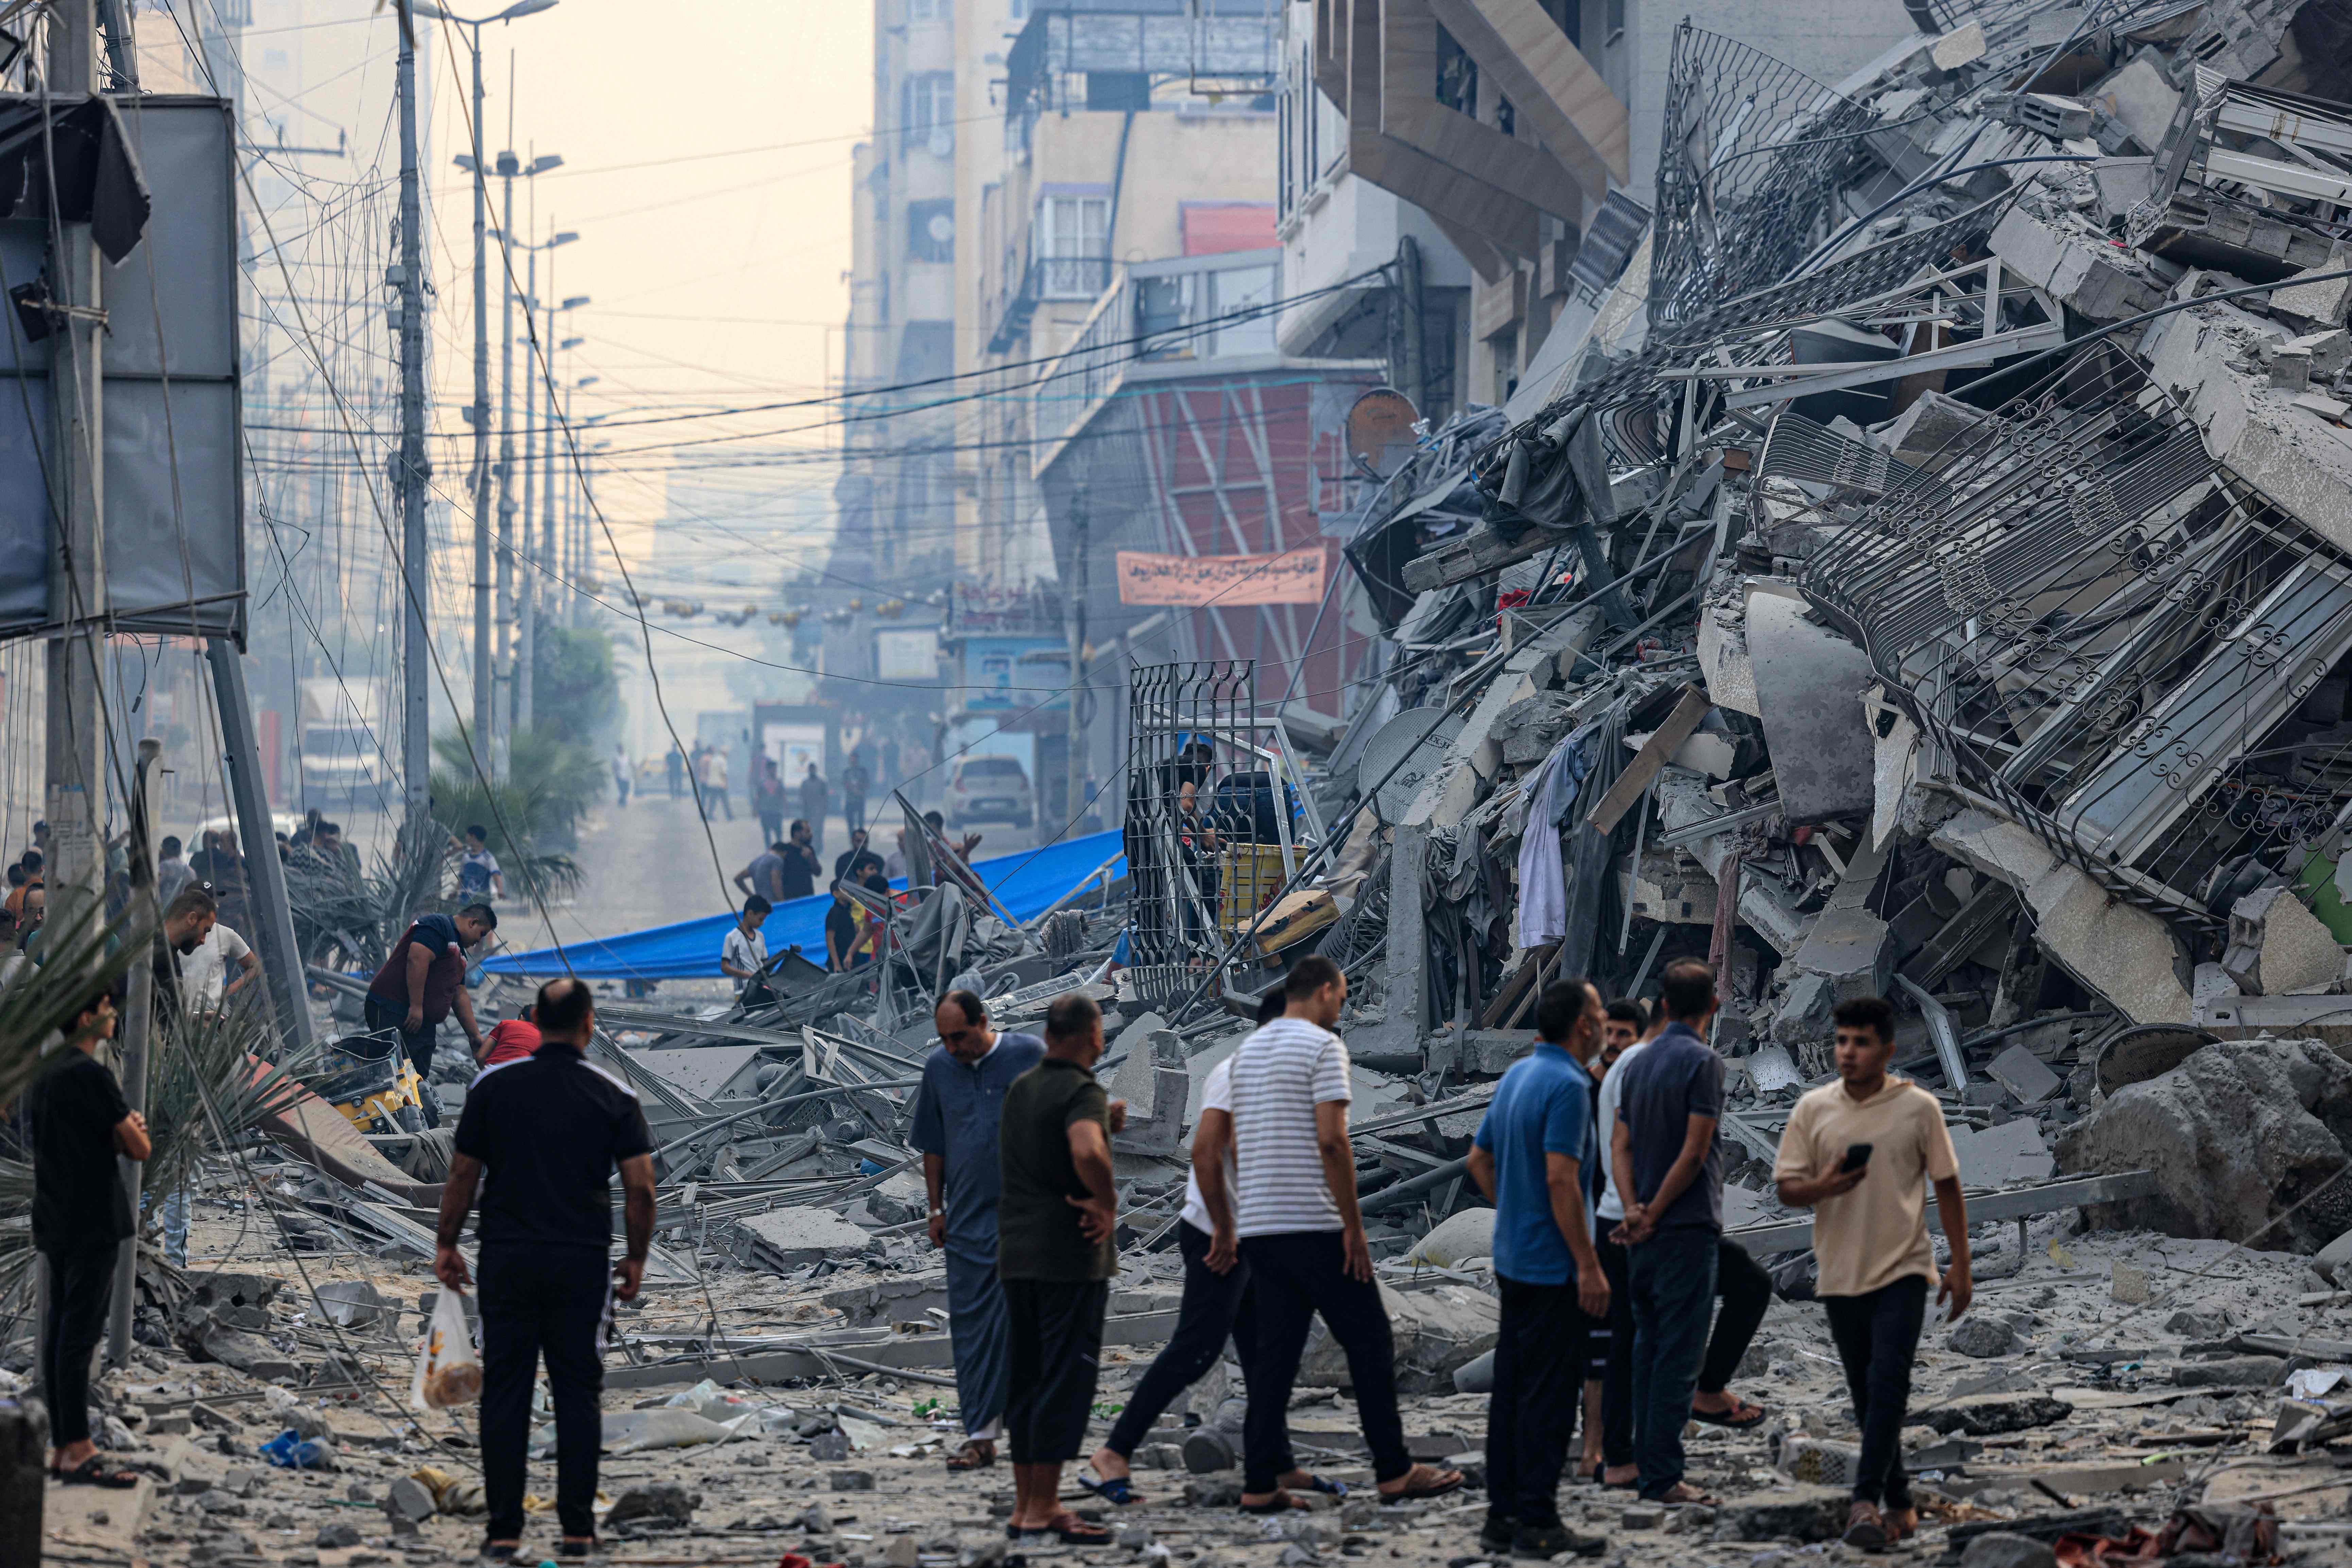 Residents walk along a debris-strewn street in front of a building that collapse during an Israeli air strike